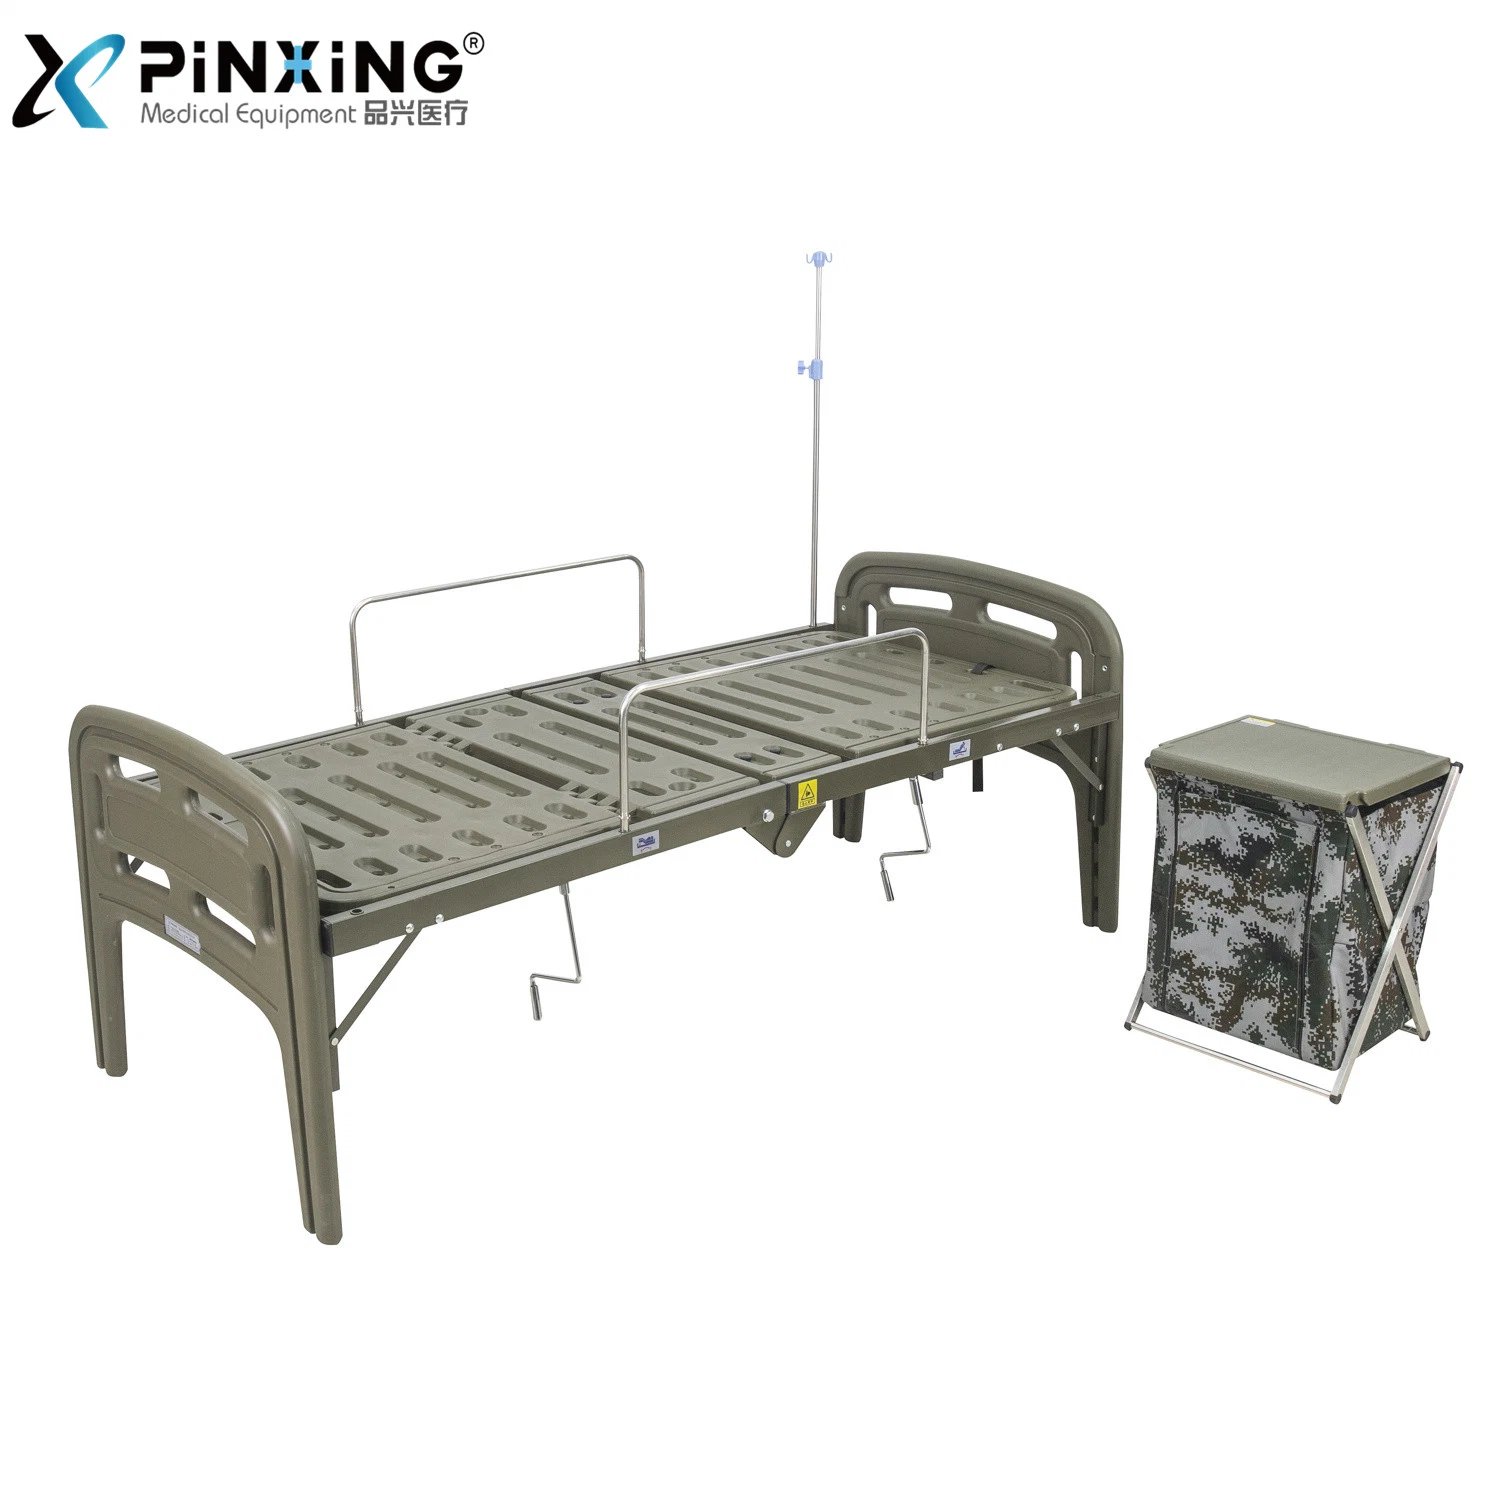 2 Function Folding Field Hospital Bed with Hand Crank